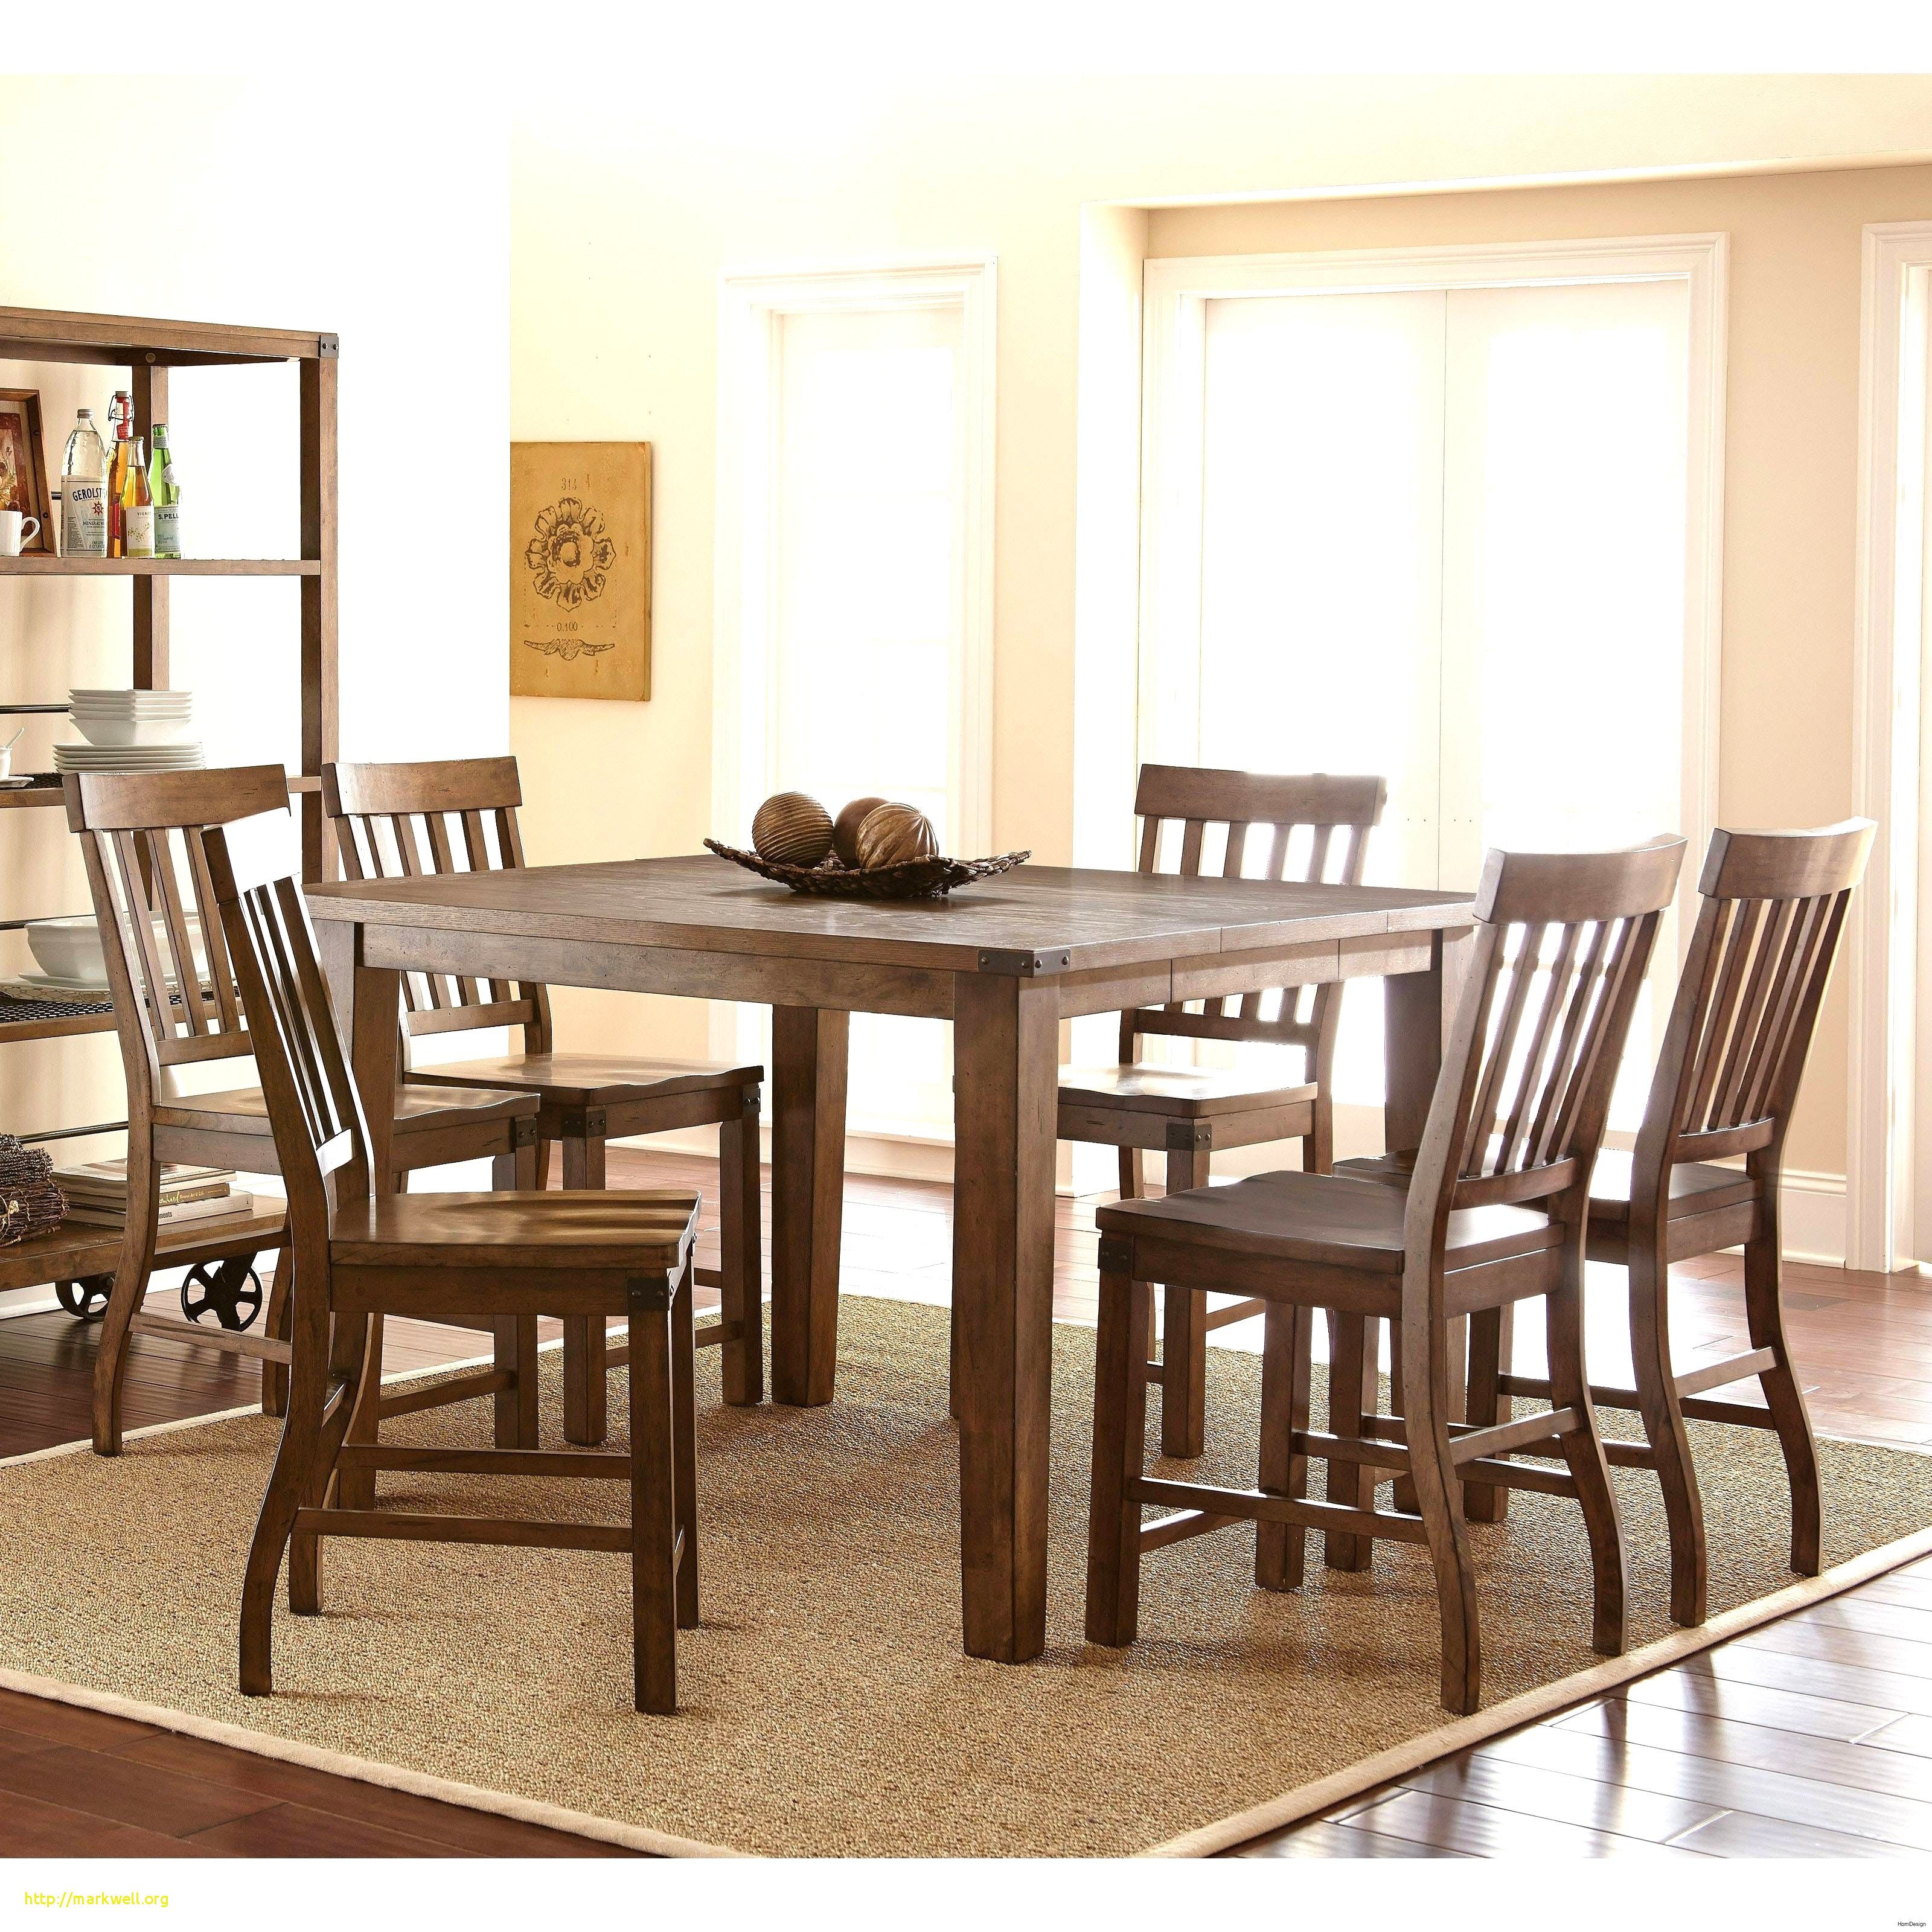 Wal Mart Bedroom Furniture Lovely Fresh Walmart Dining Room Chairs